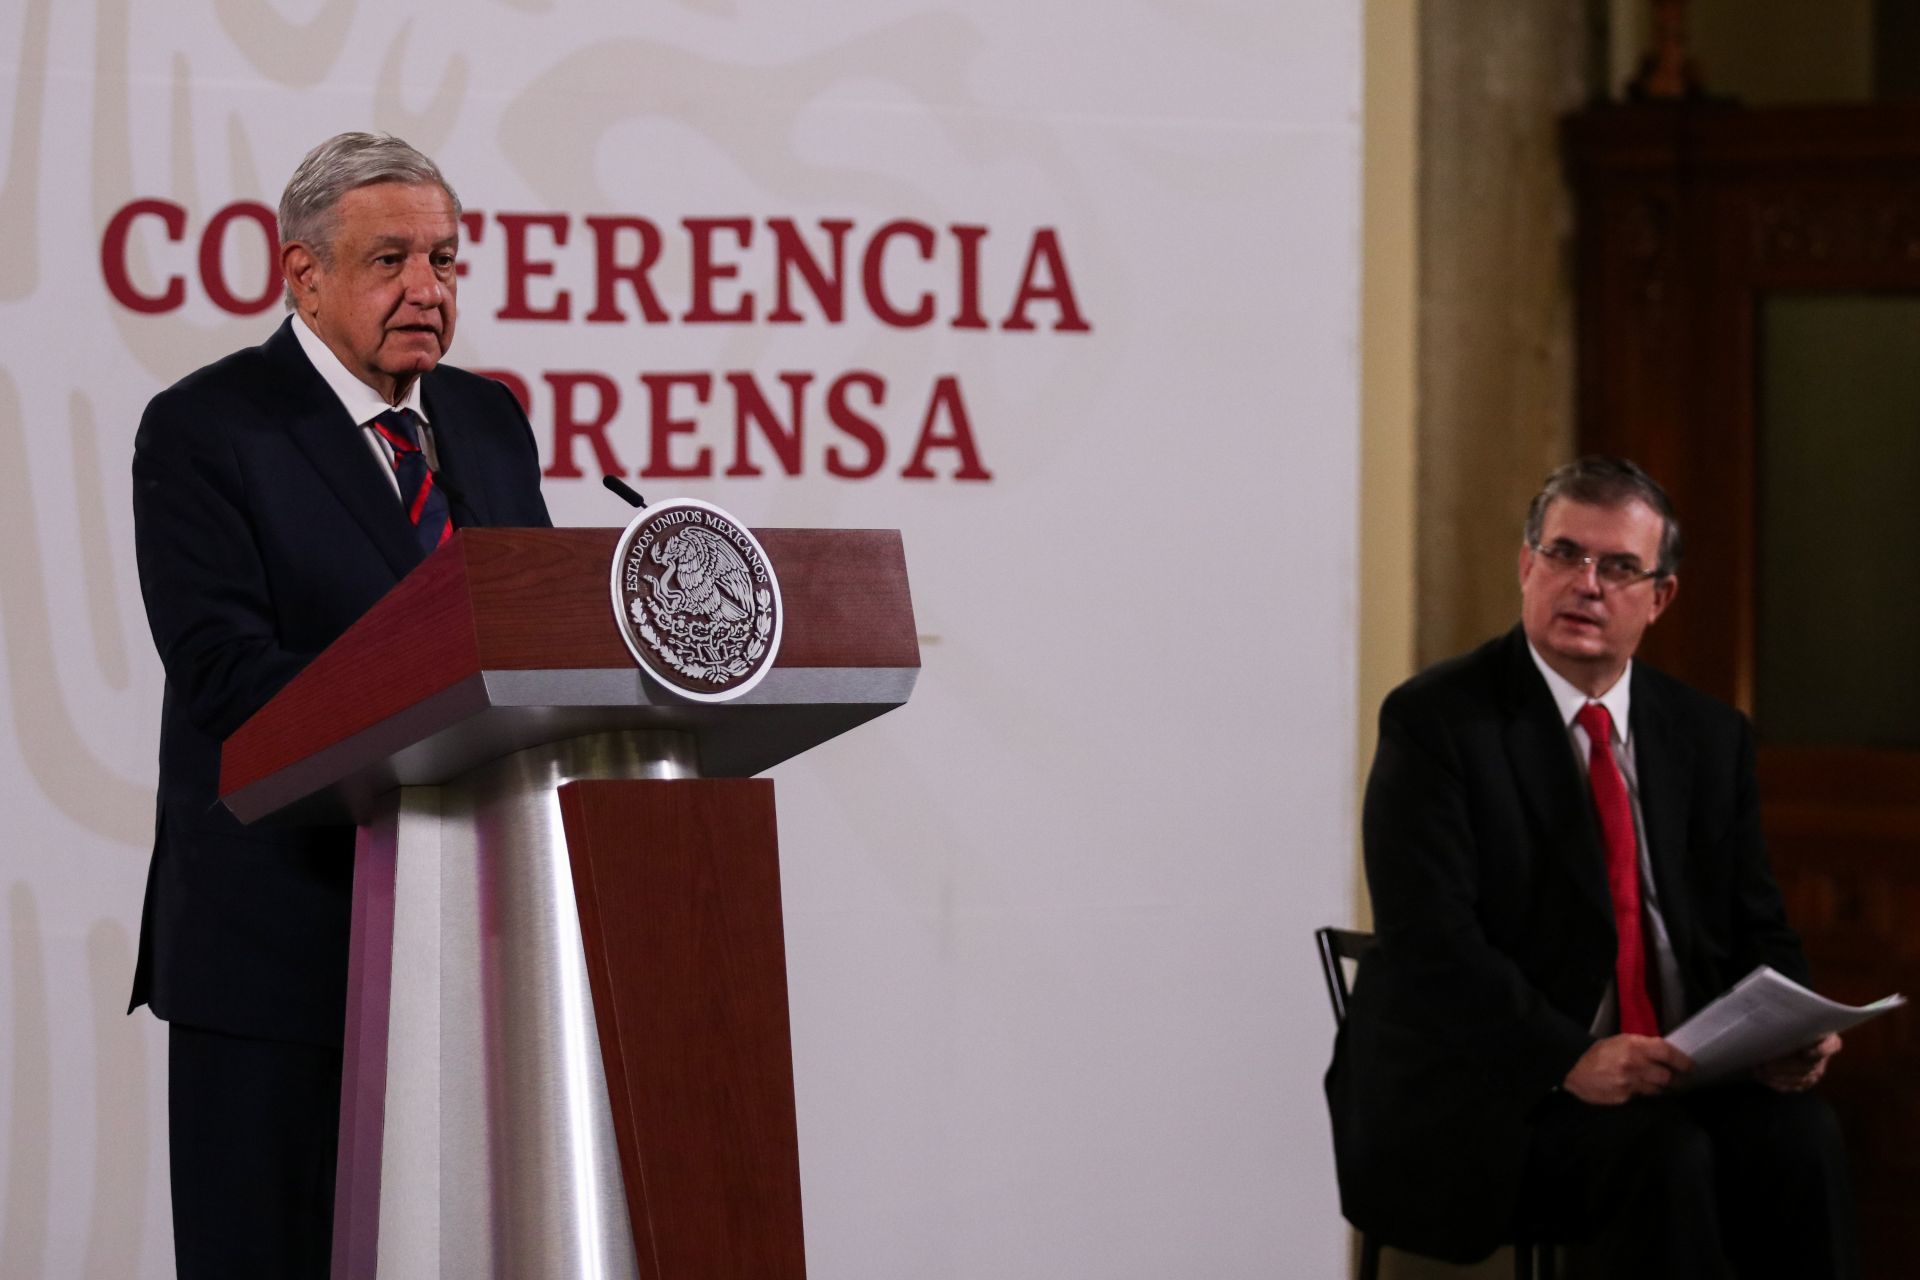 Cienfuegos will arrive free in Mexico; where appropriate, Army prestige is played: AMLO